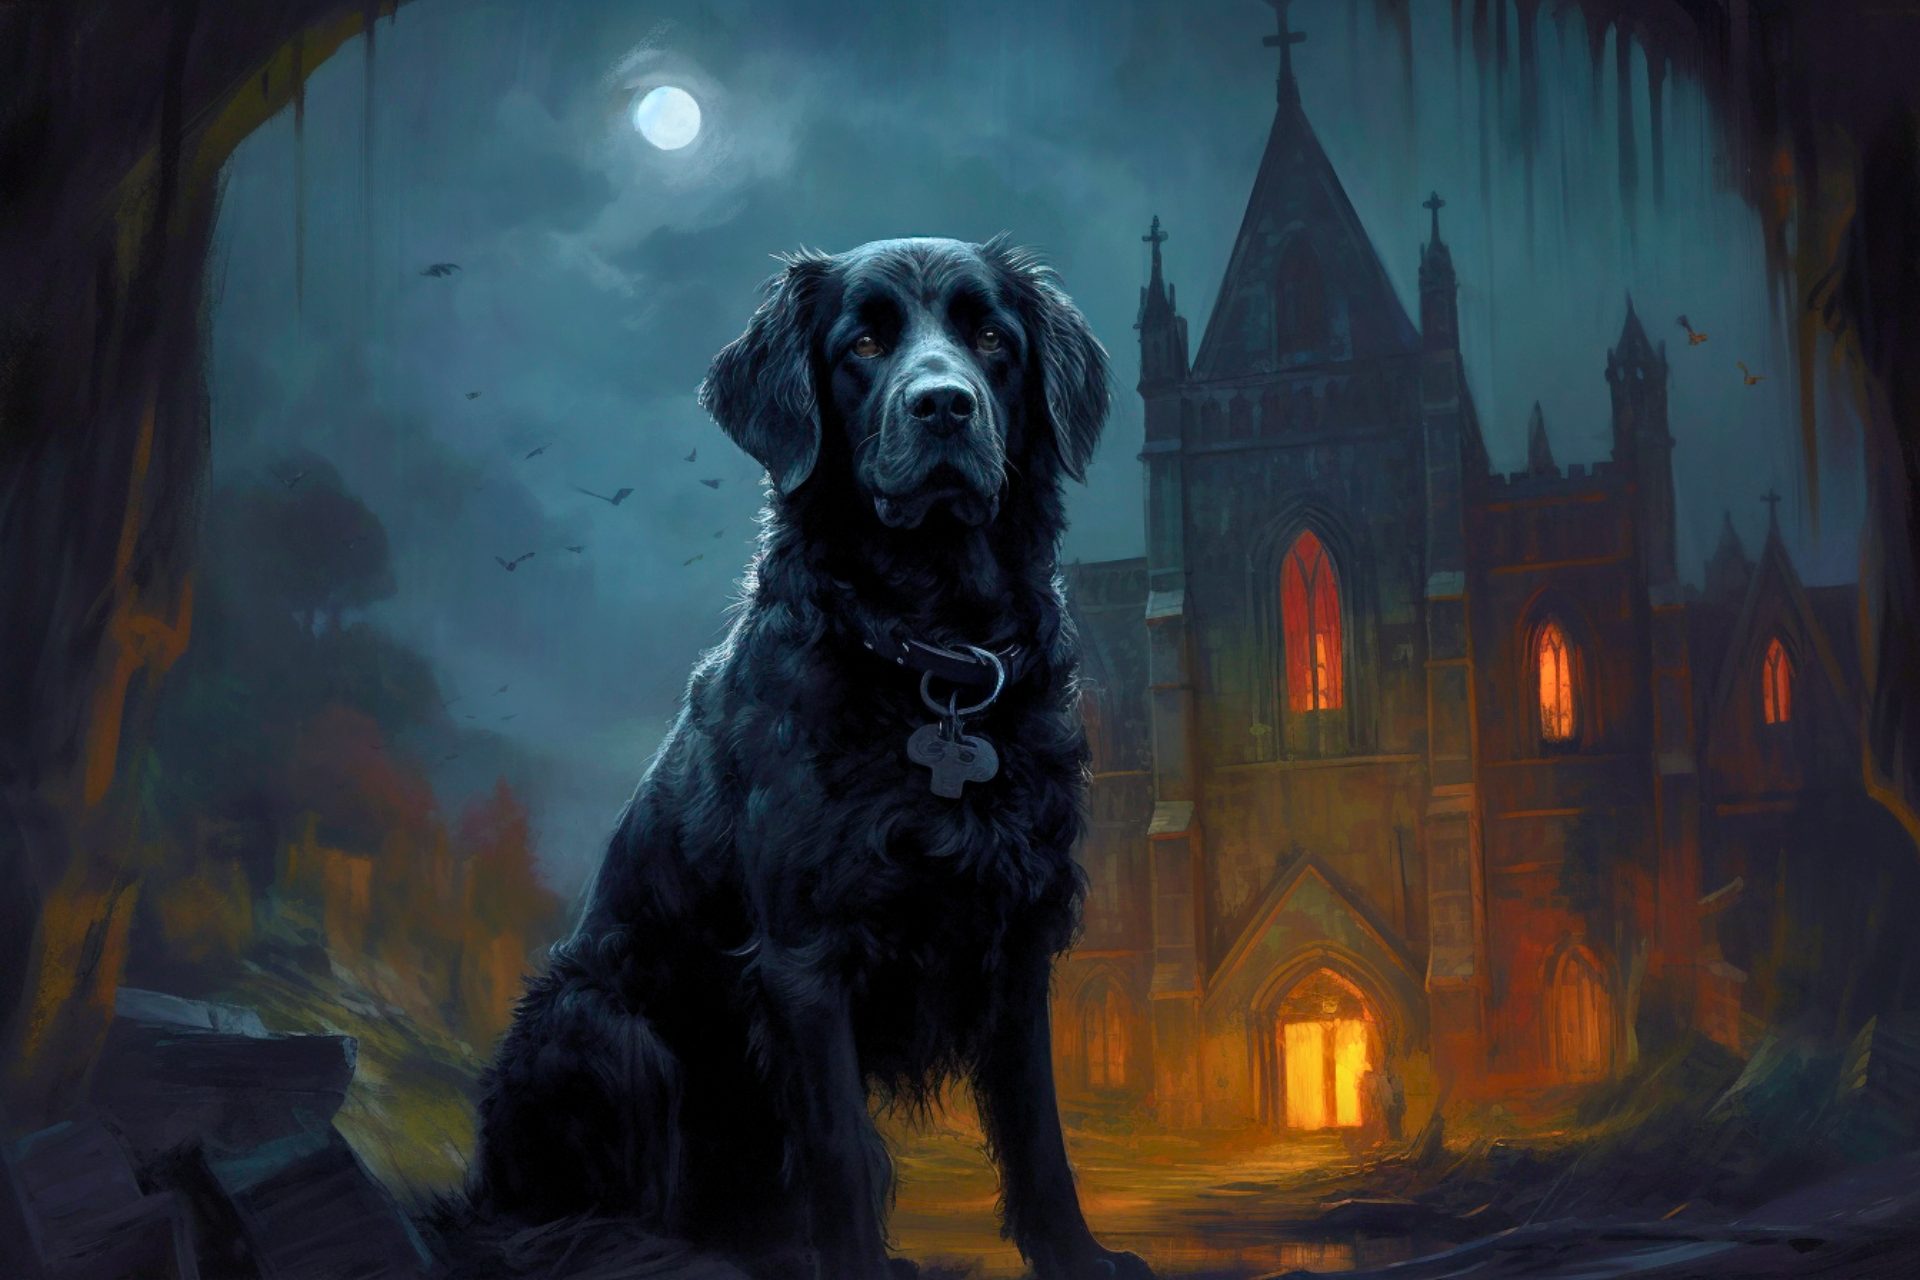 A large black dog sitting in front of a stone church, at night.